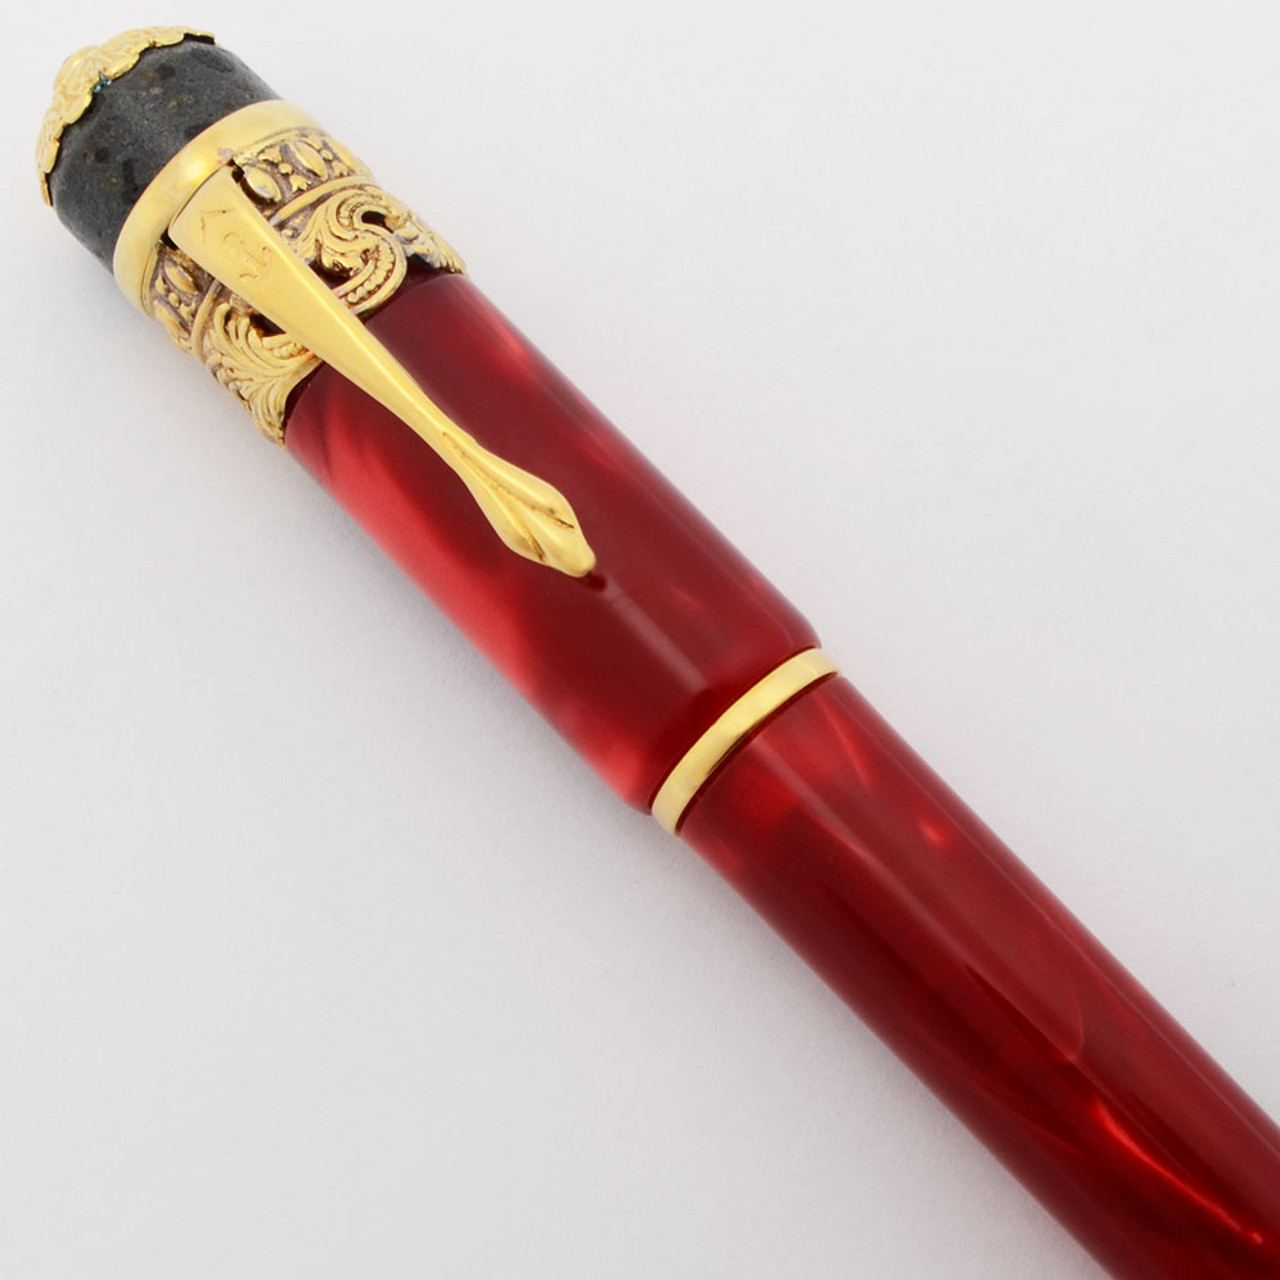 Ancora Vesuvio LE Rollerball/Ballpoint Pen (2002) - Red Resin Vermeil Trim (Excellent, Works Well)